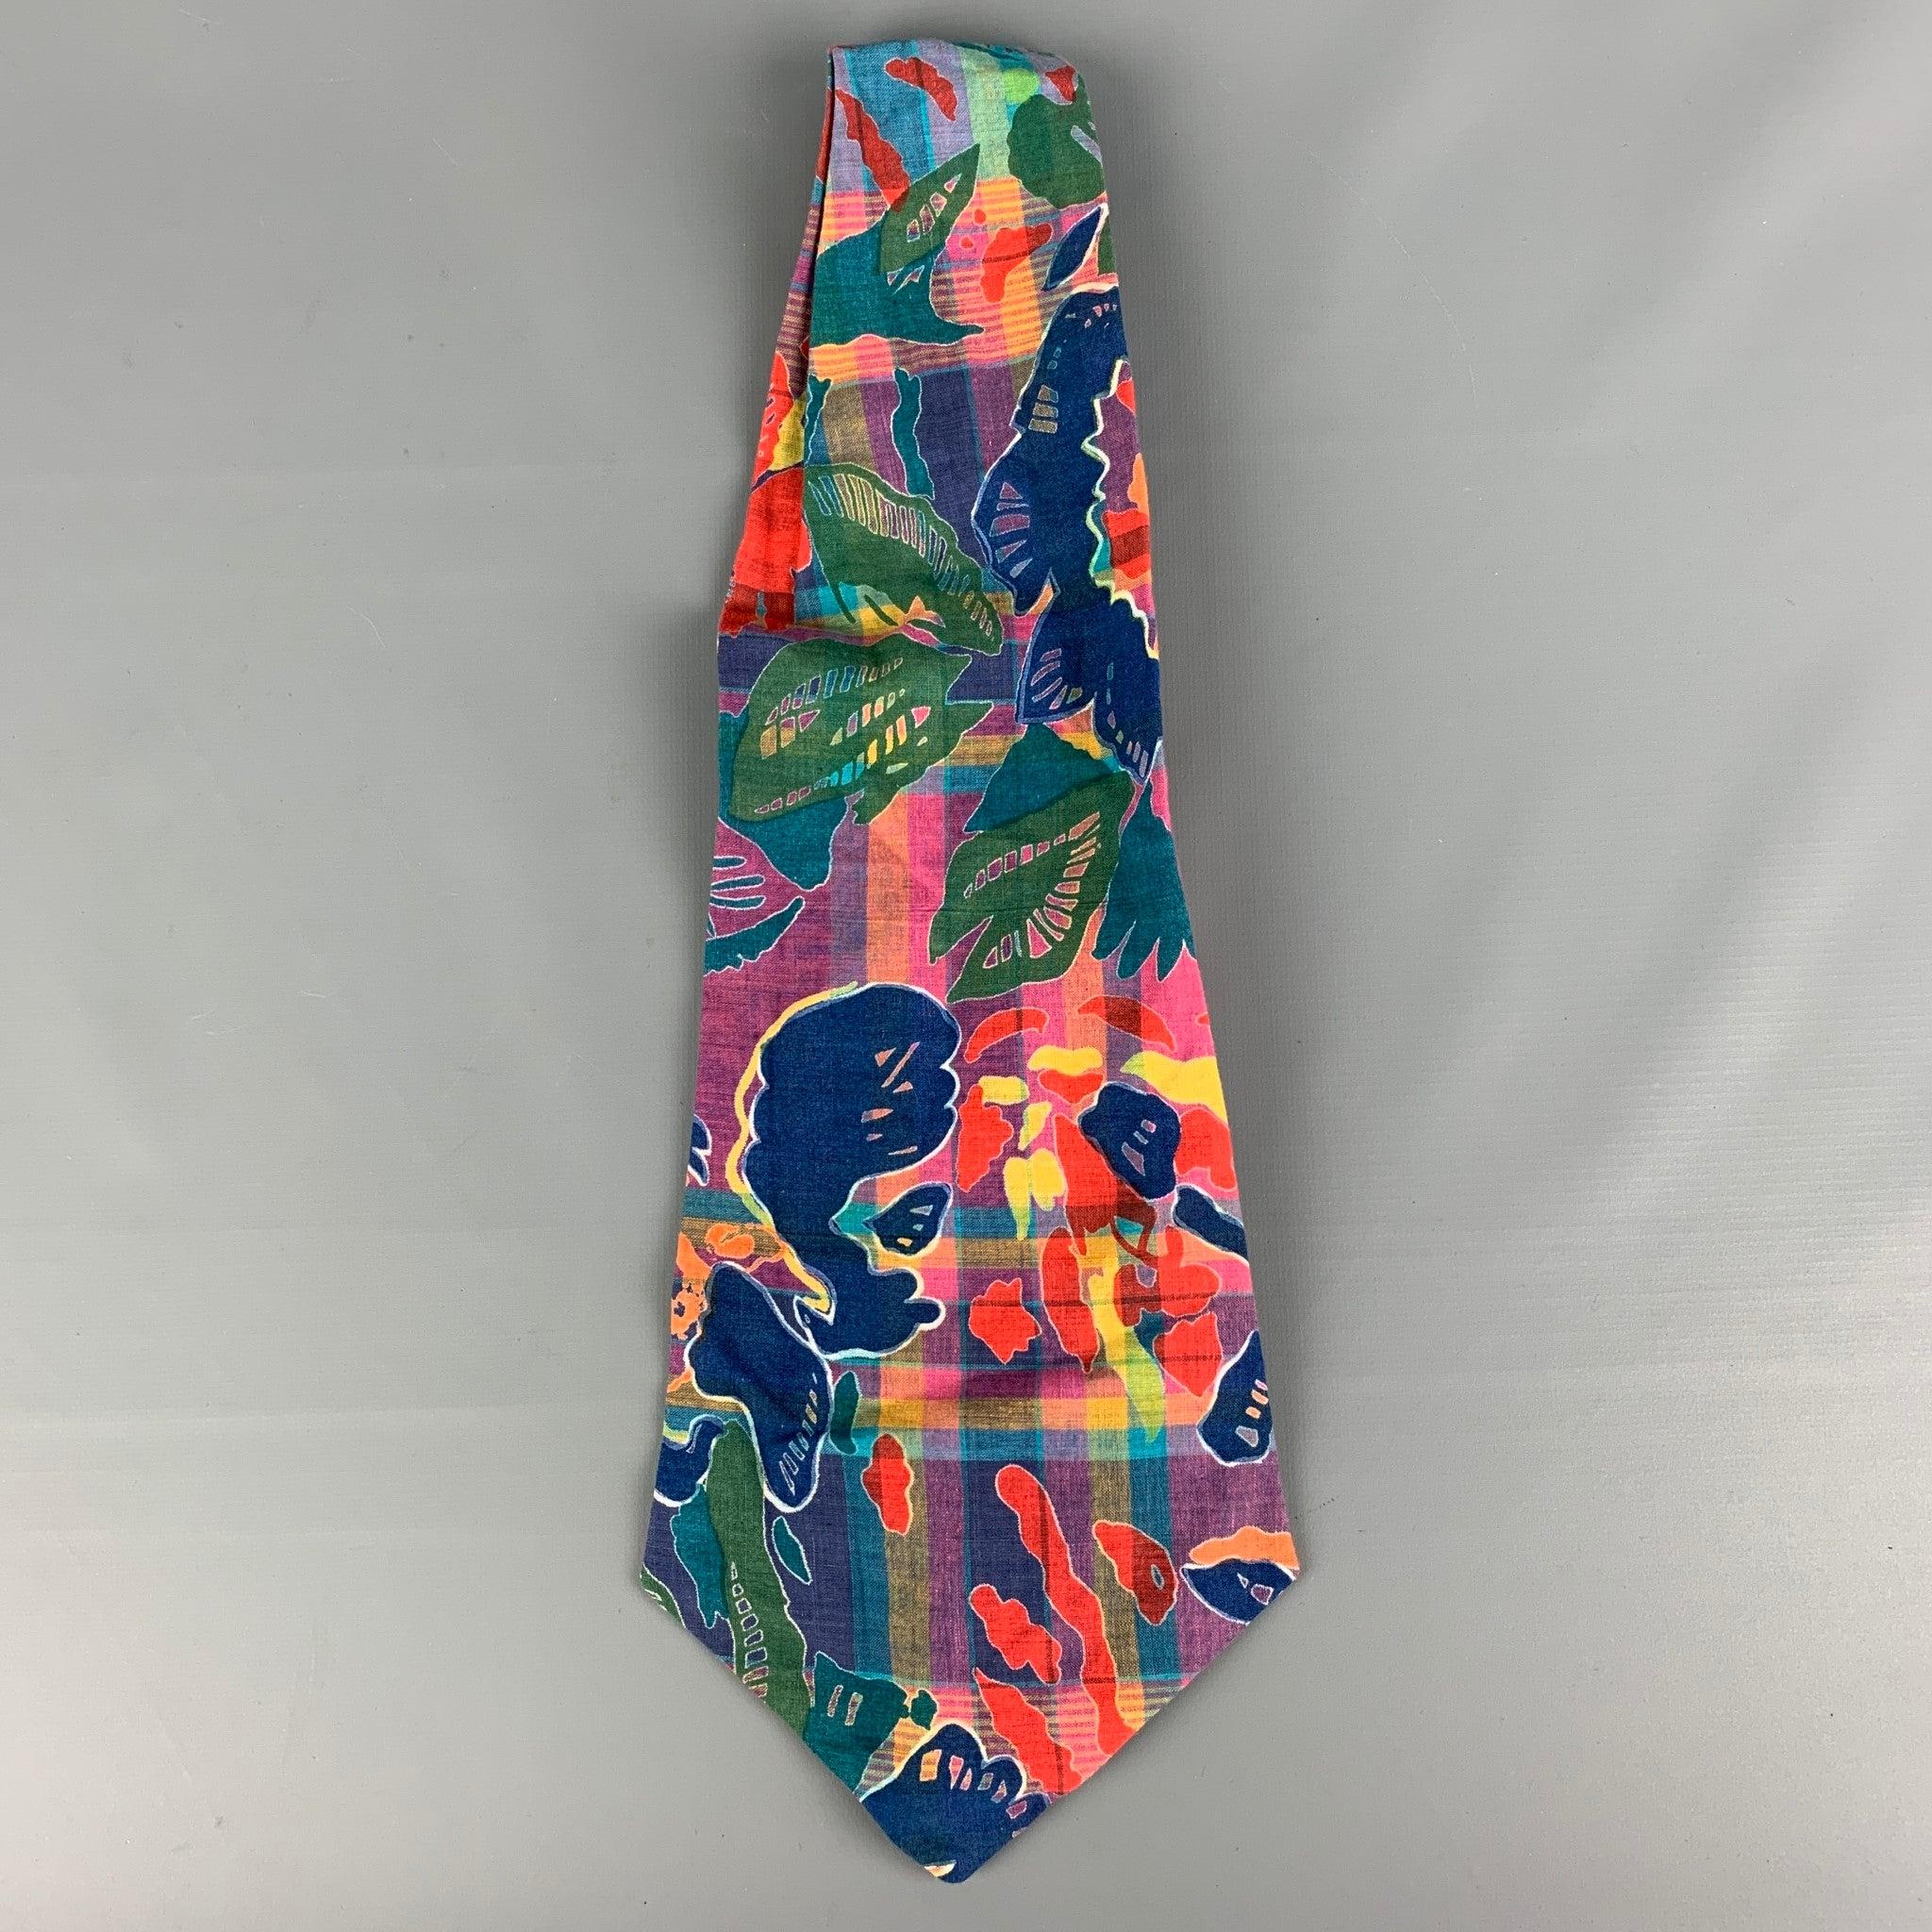 PAUL STUART Multi-Color Abstract Cotton Tie In Good Condition For Sale In San Francisco, CA